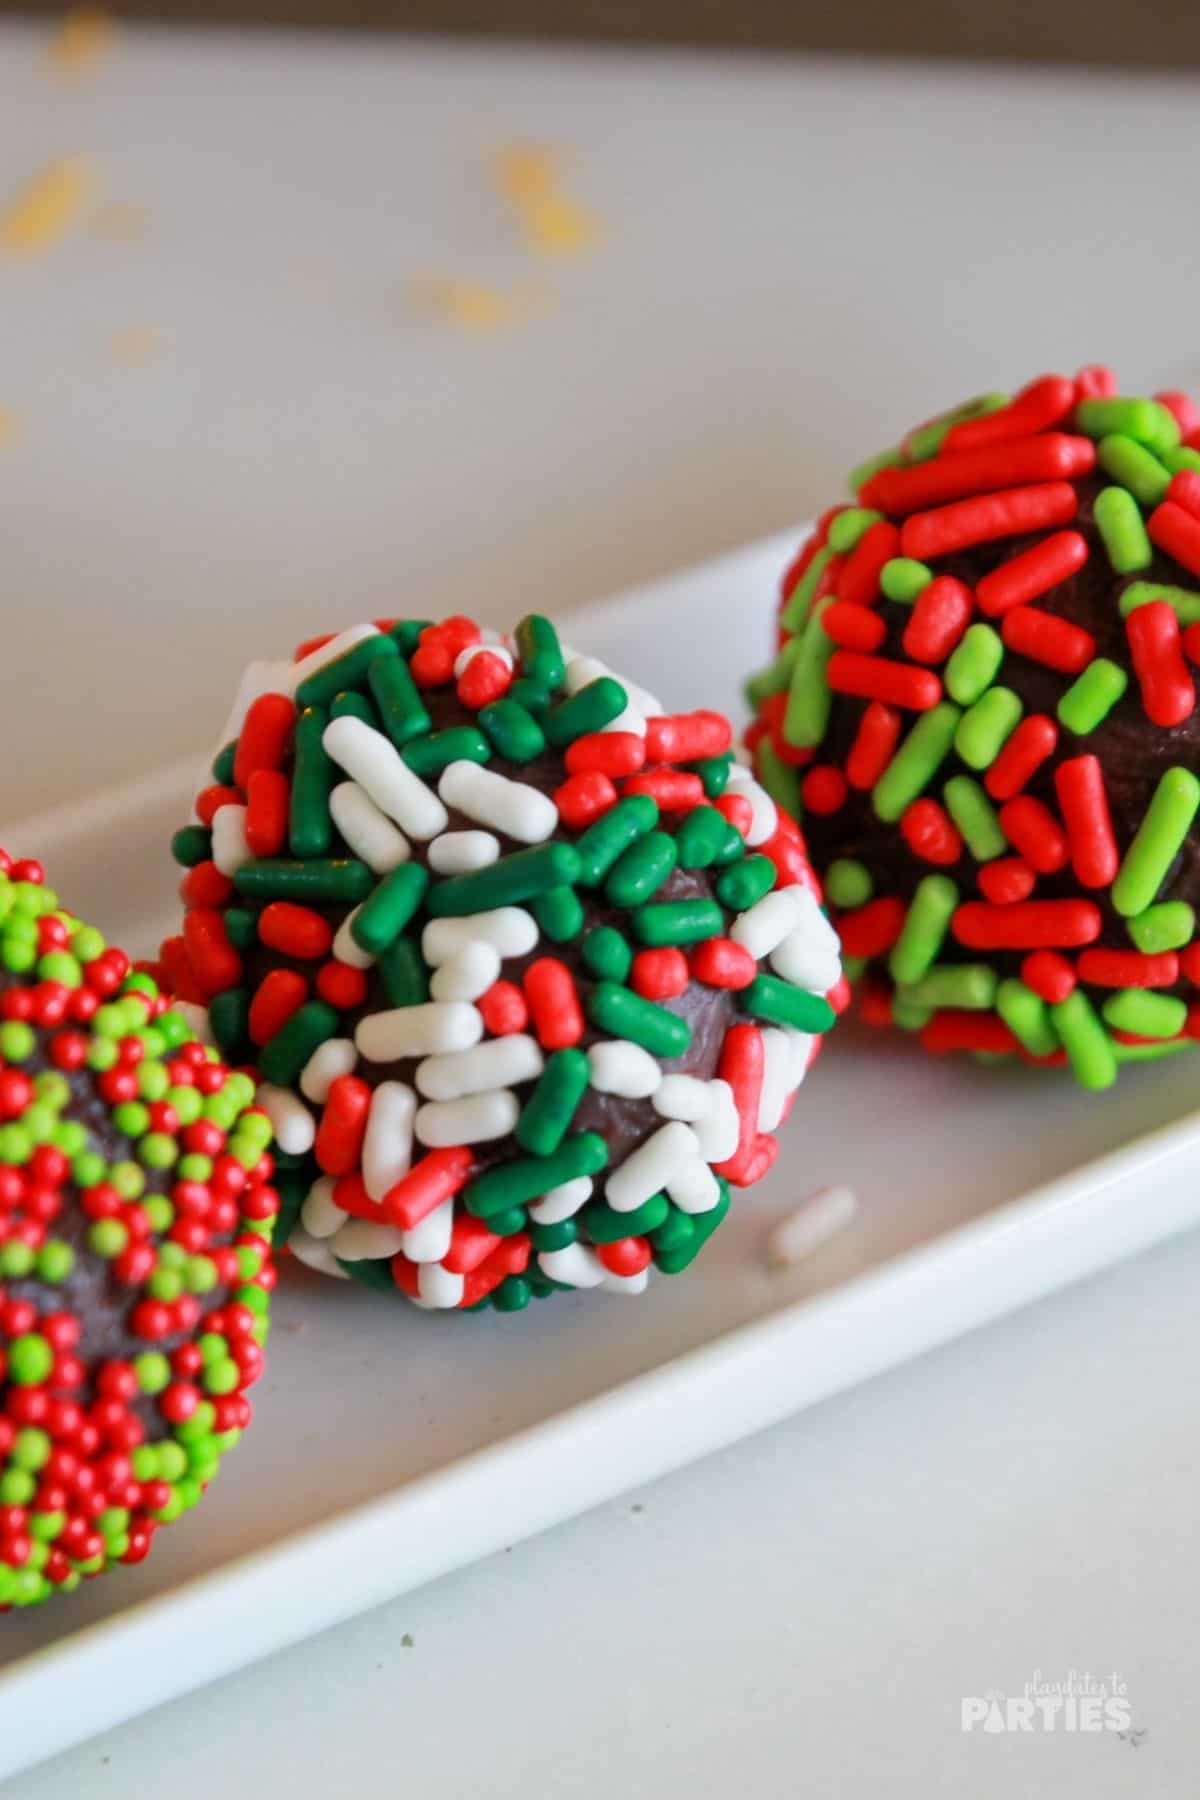 Sprinkles covered holiday truffles with orange zest nearby.